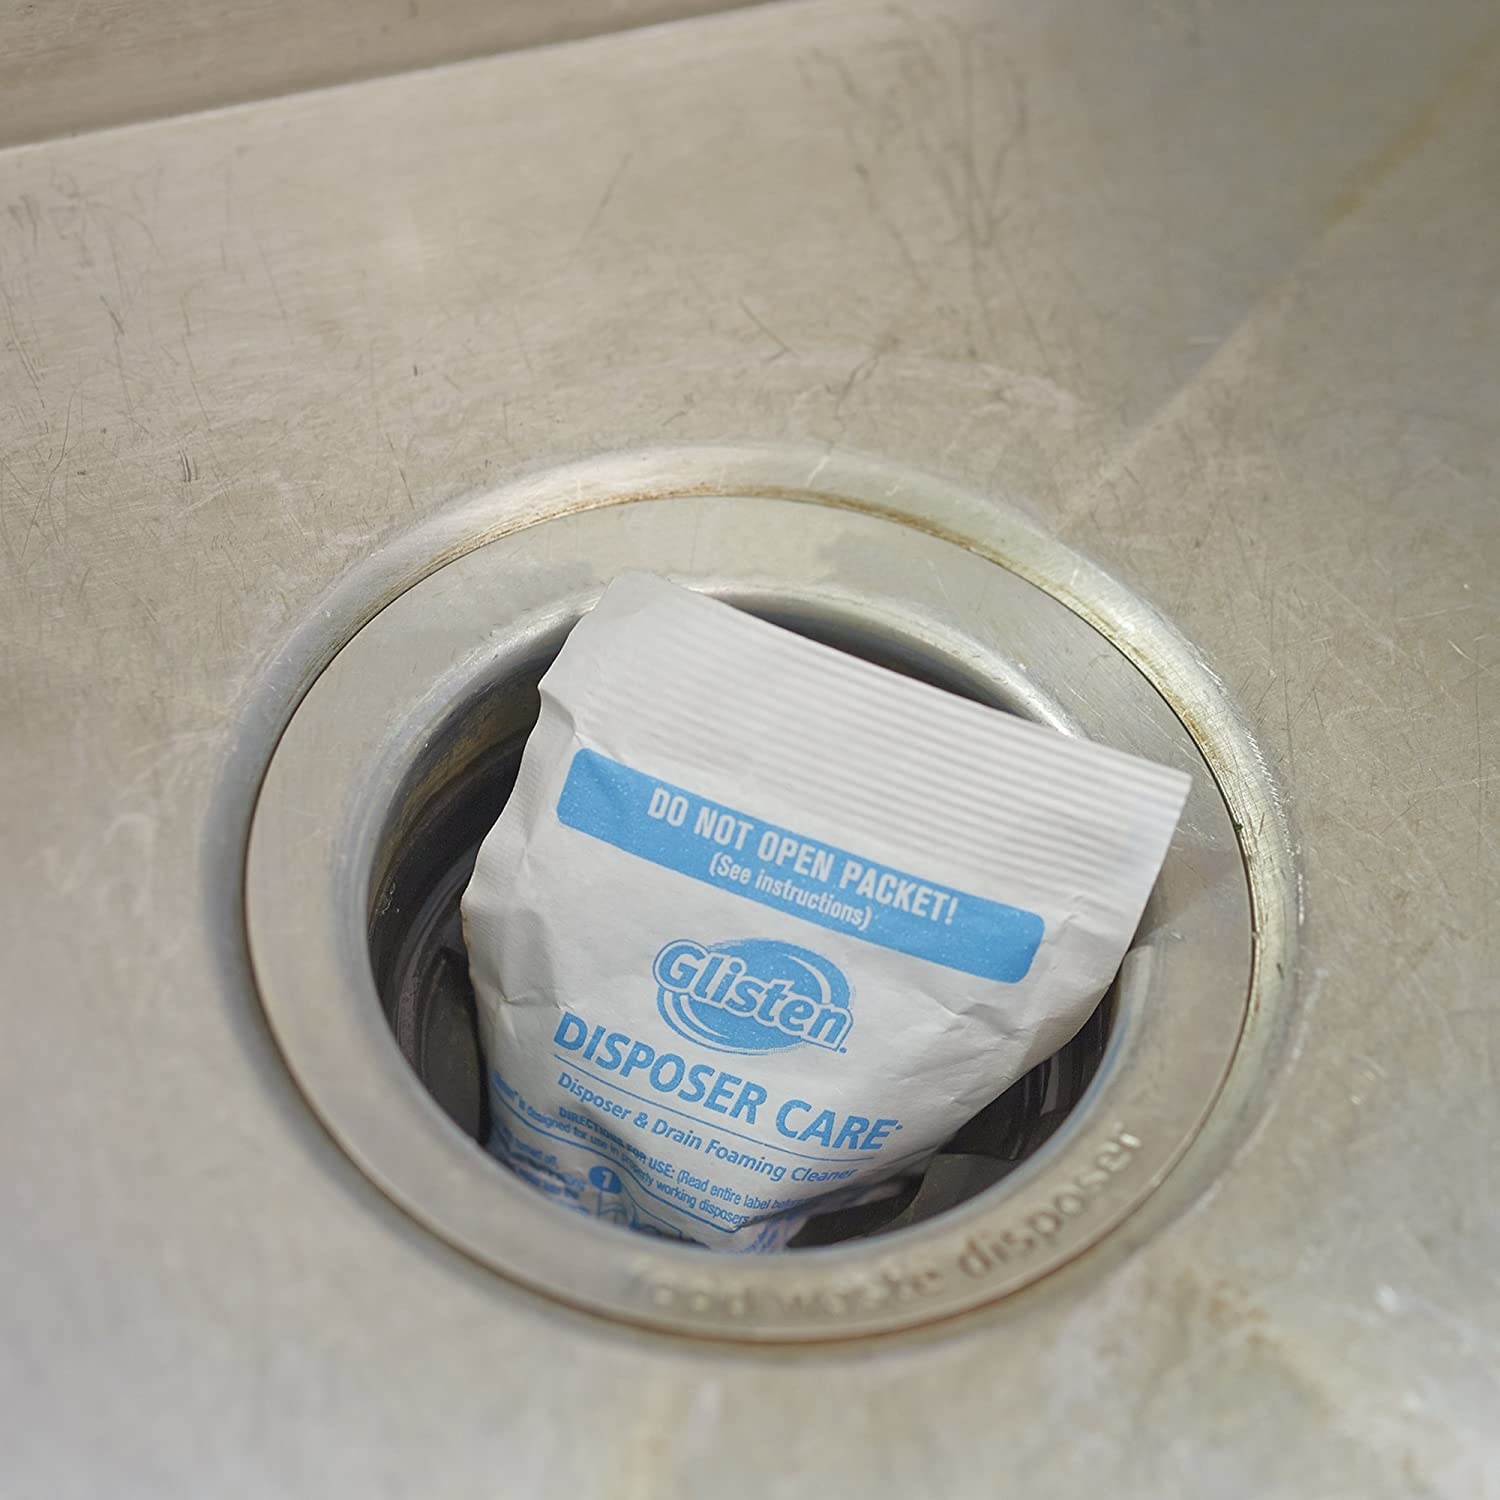 The foaming disposal cleaning pack resting in a garbage disposal drain of sink